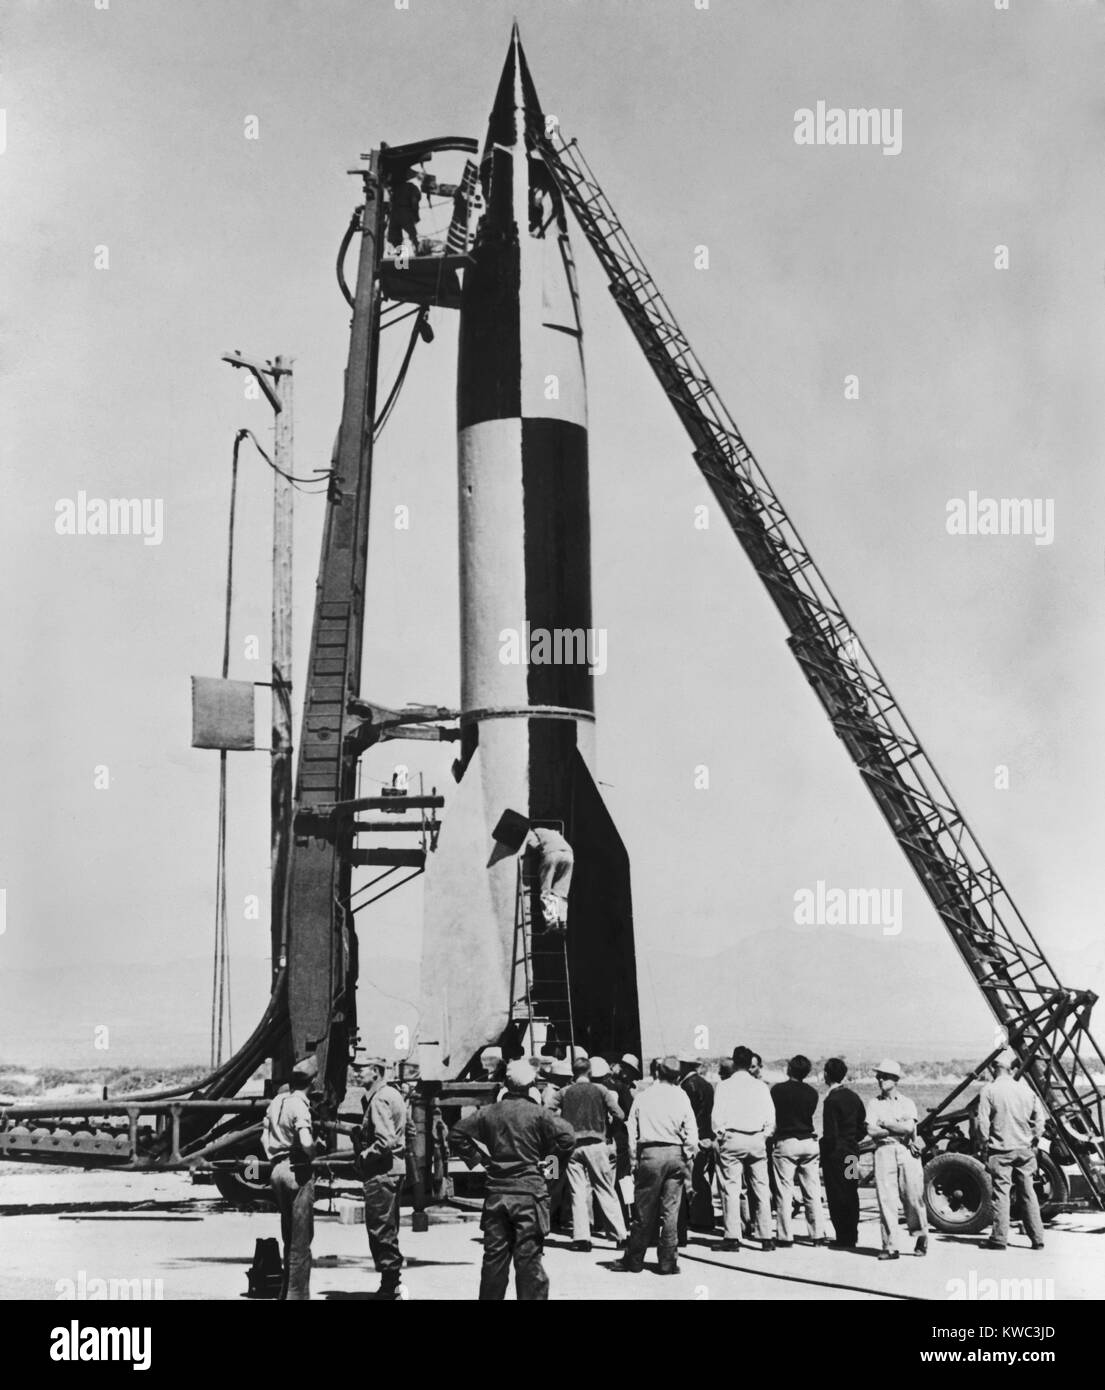 V-2 rocket, before launching at the U.S. Army proving grounds, White Sands, N.M. On May 7, 1946 its Flight-control instruments were adjusted on the launch pad. On May 10 it launched and reached an altitude of 112 kilometers, the first successful flight in the U.S. (BSLOC 2015 14 121) Stock Photo